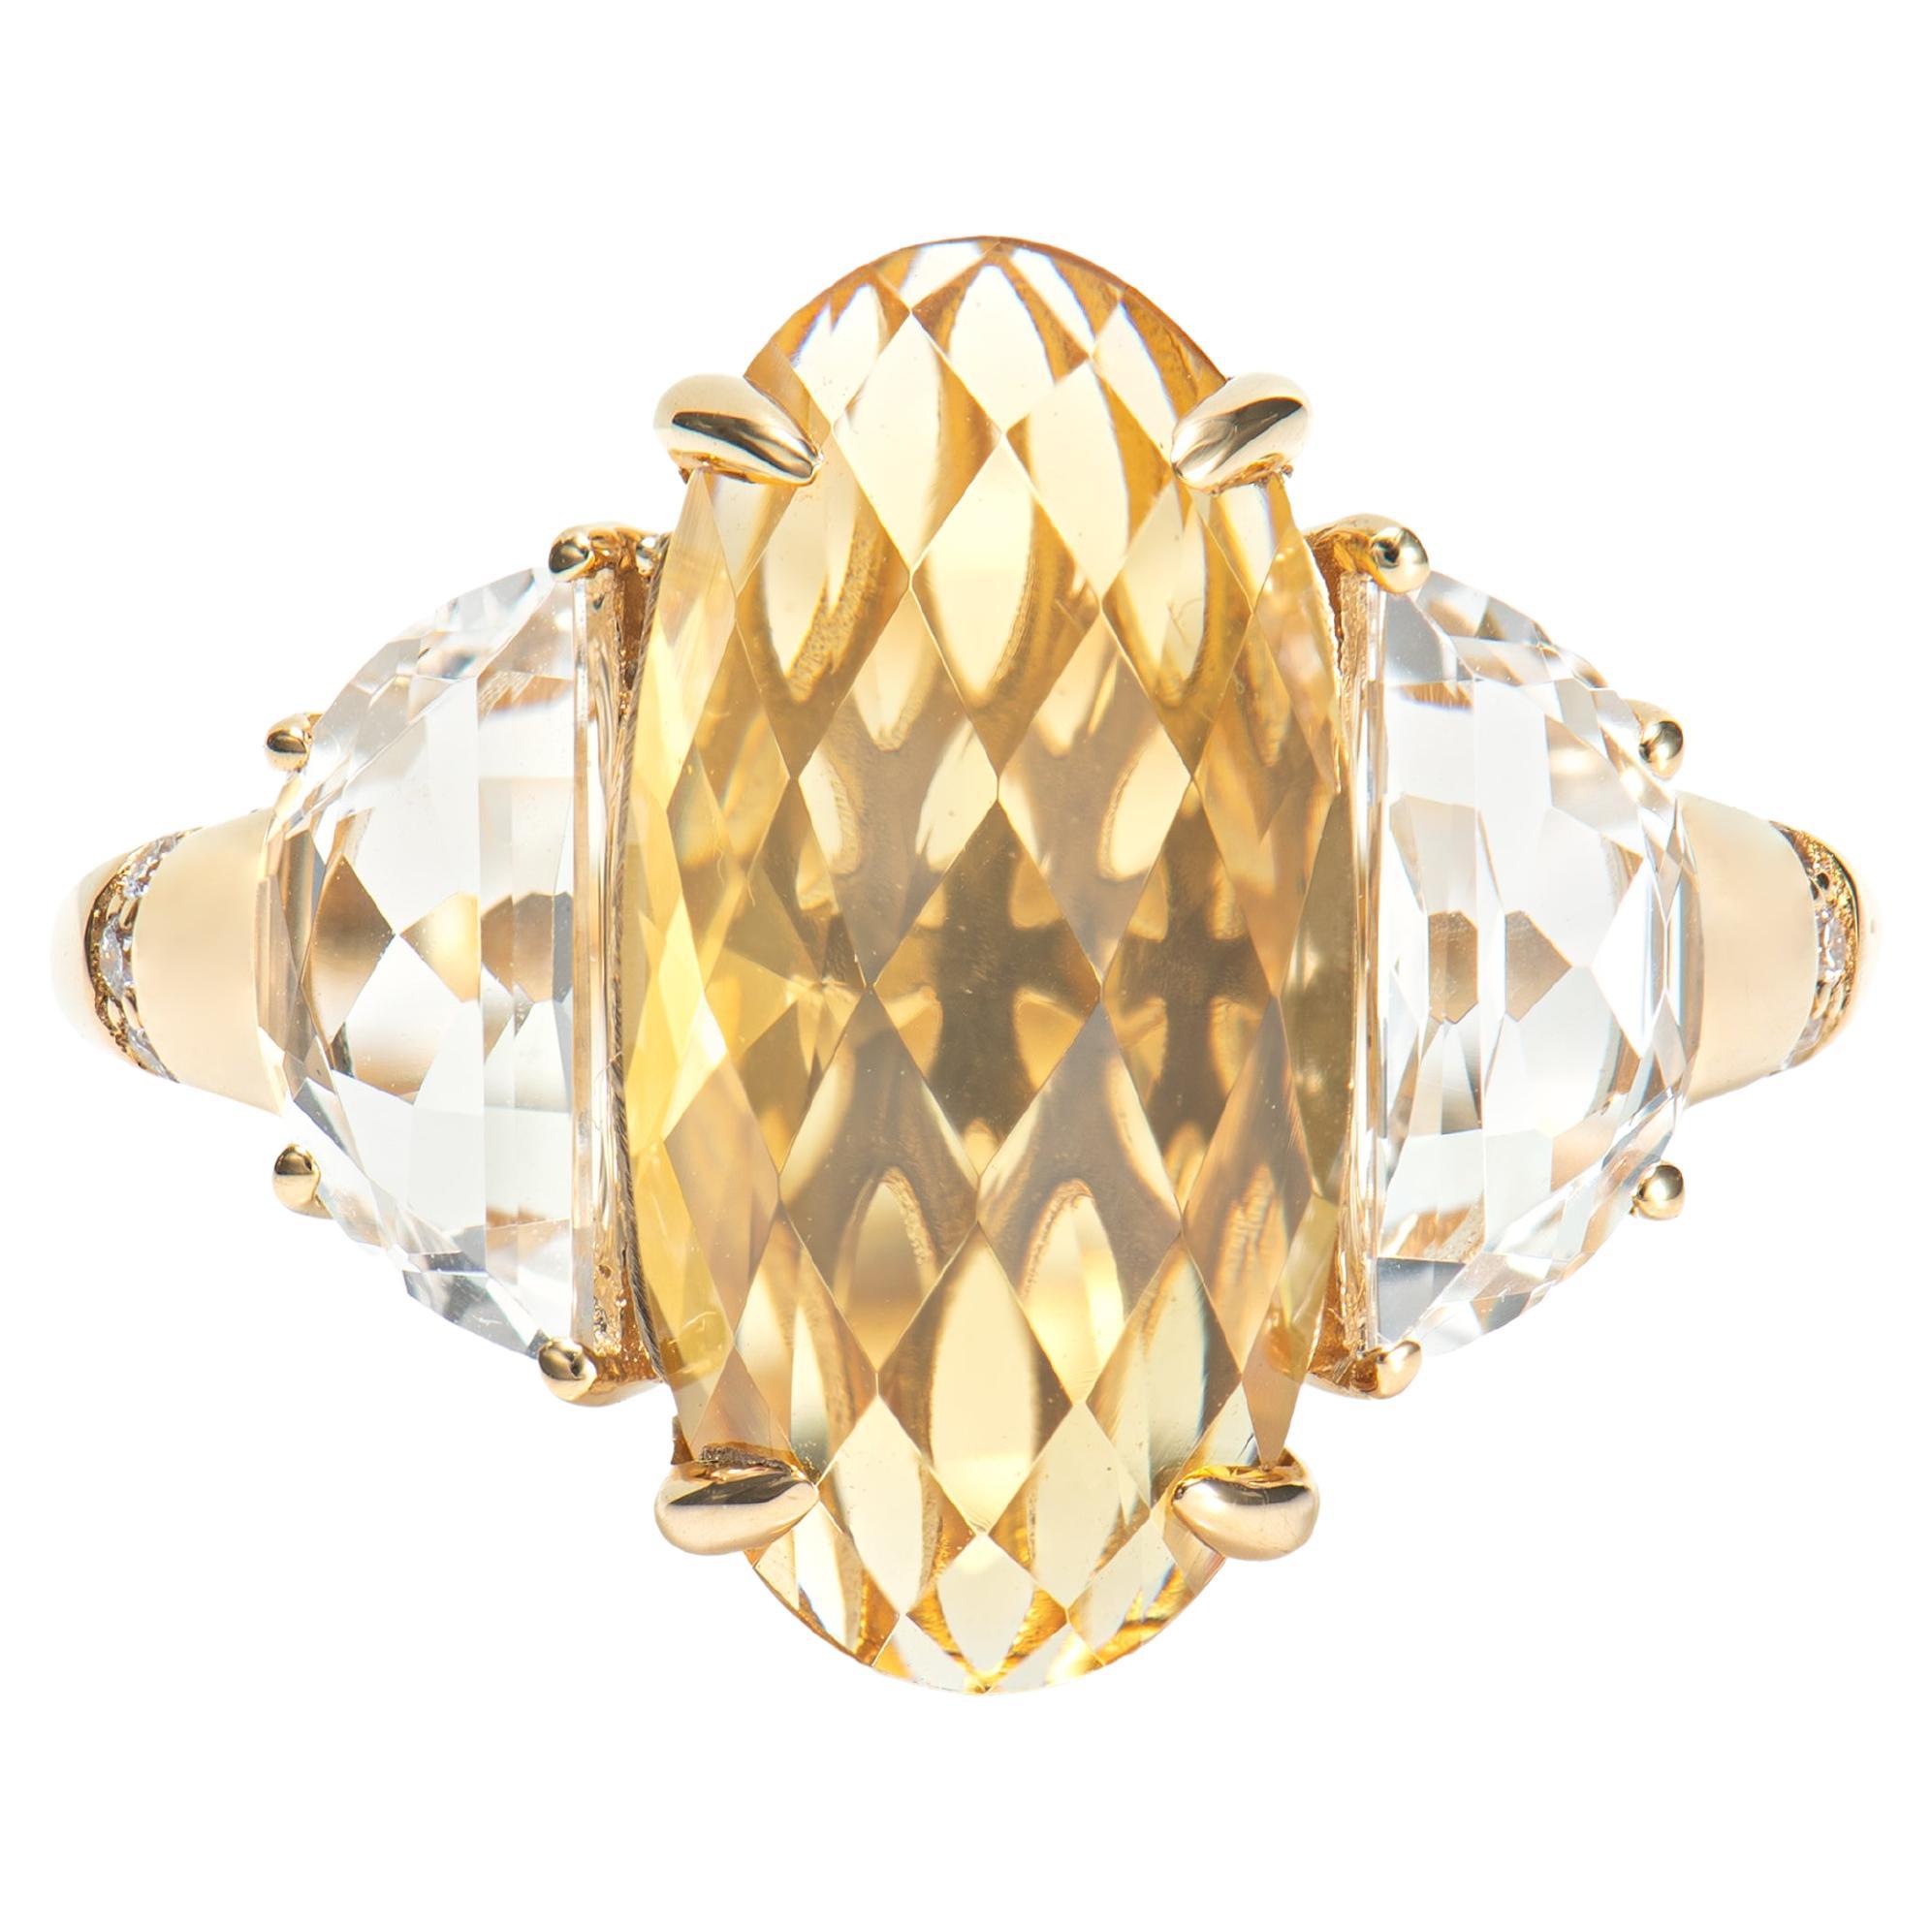 4.54 Carat Citrine Antique Ring in 18KYG with White Topaz and Diamond